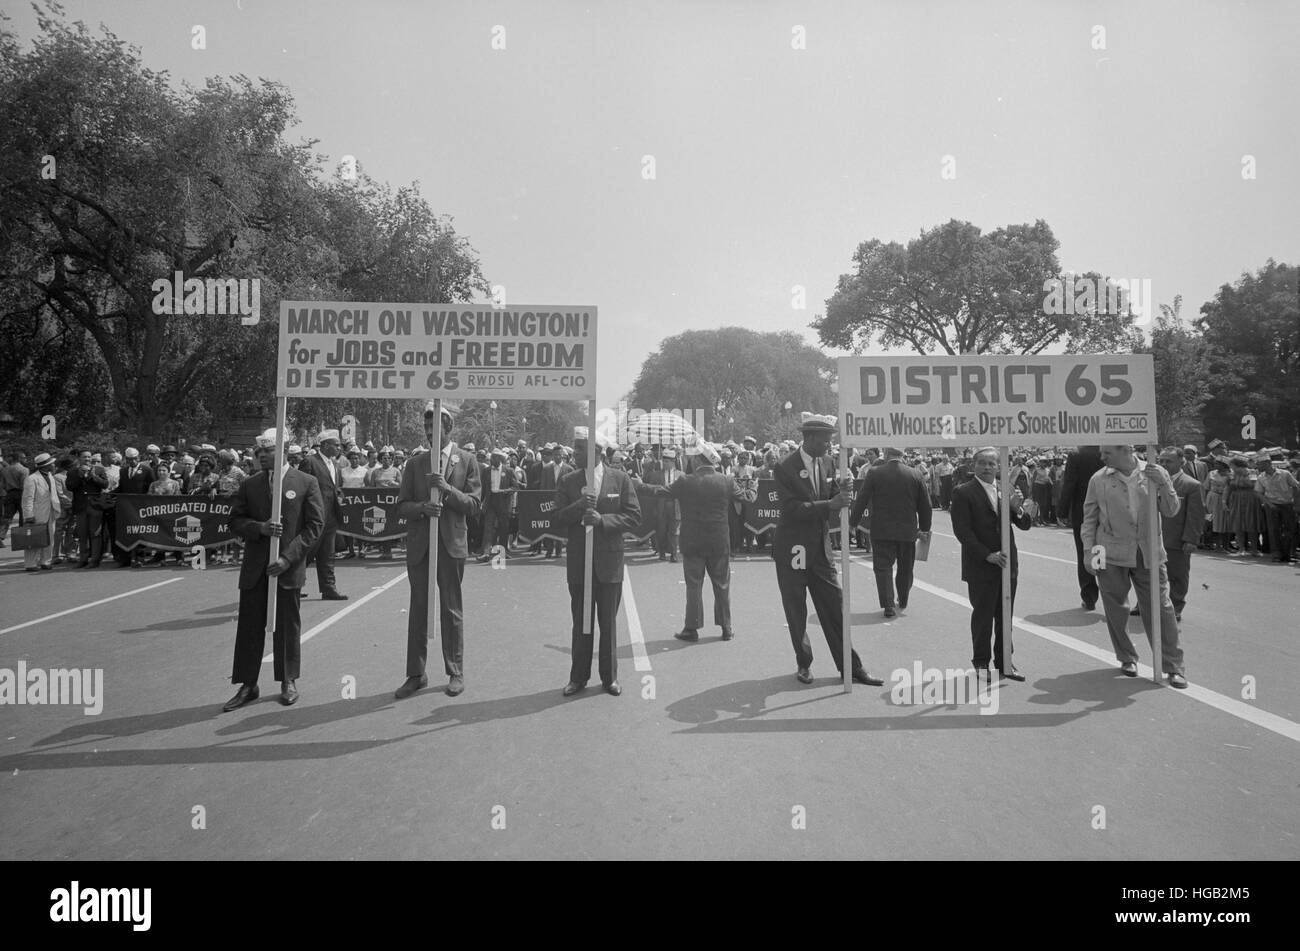 August 28, 1963 - Marchers carrying District 65 sign at the March on Washington. Stock Photo